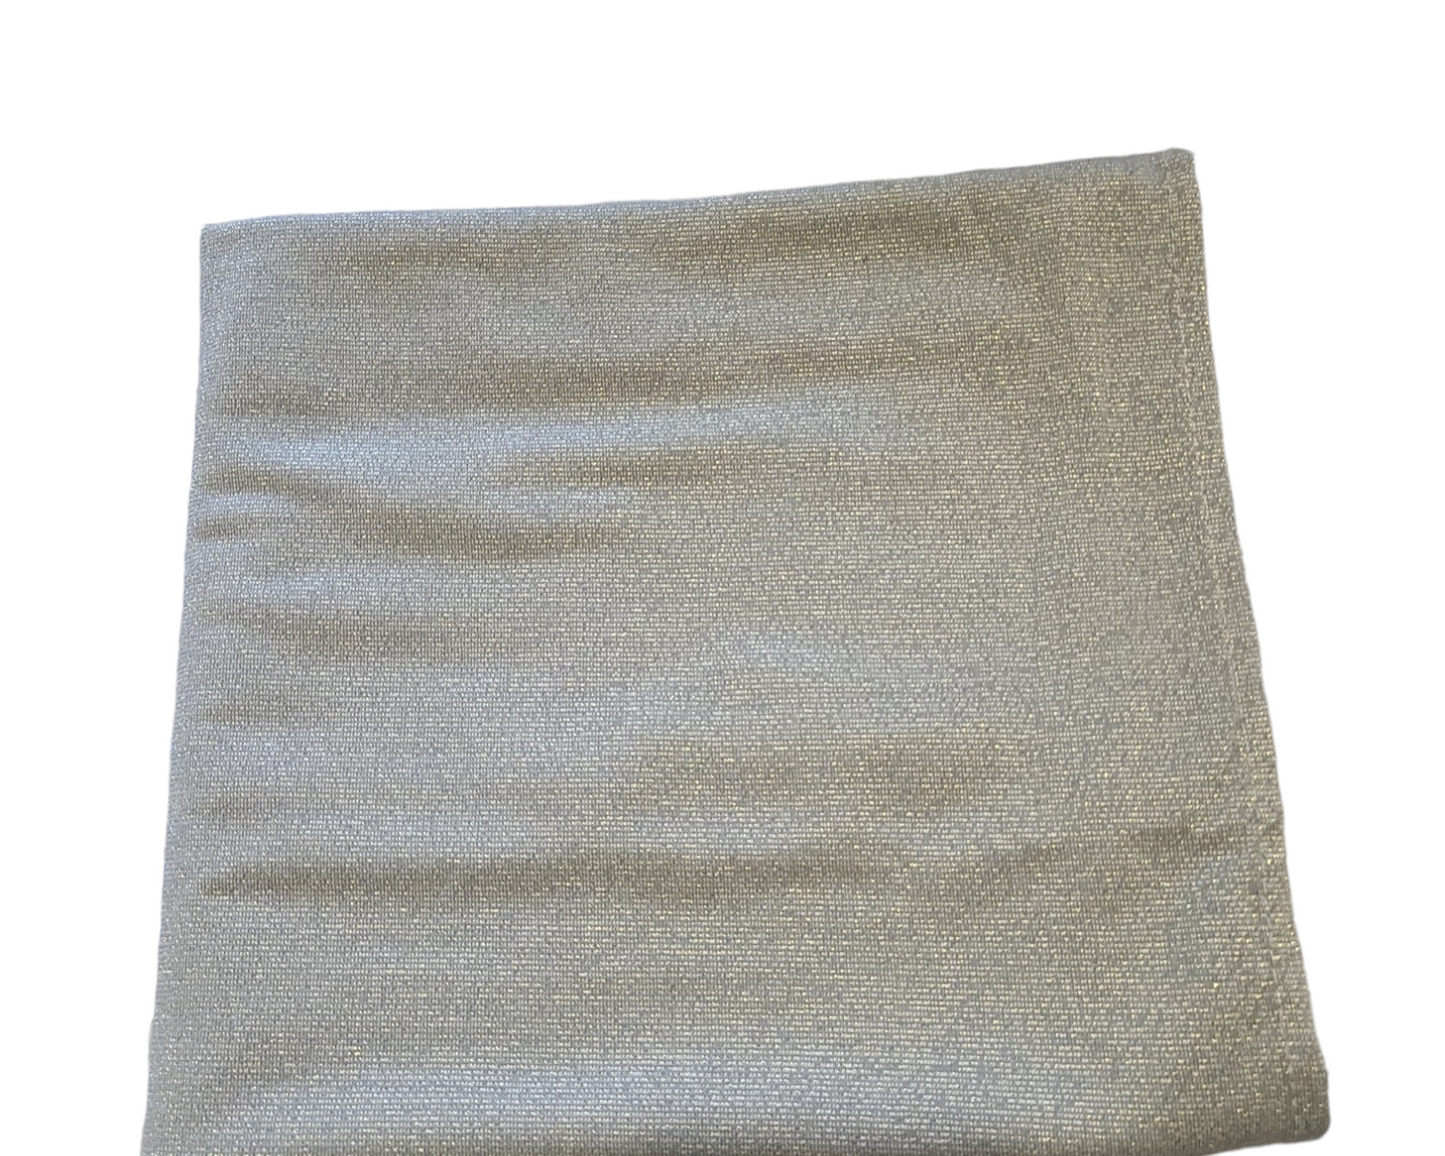 Solid Shimmery Long Scarf - Keter Hayofi Mitpachot